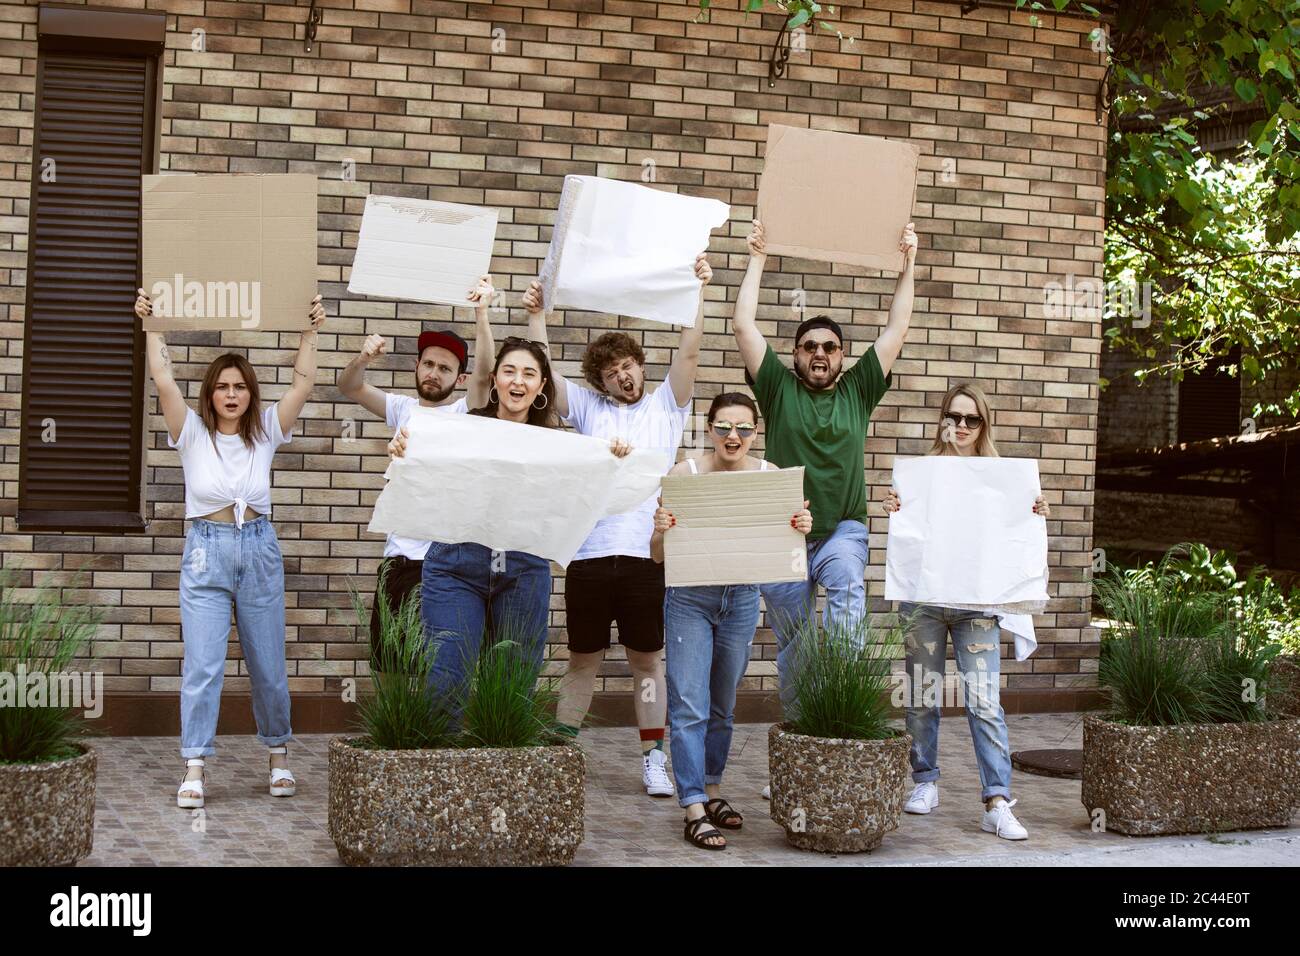 Diverse group of people protesting with blank sign. Protest against human rights, abuse of freedom, social issues, actual problems. Men and women on the street look angry, screaming. Copyspace. Stock Photo